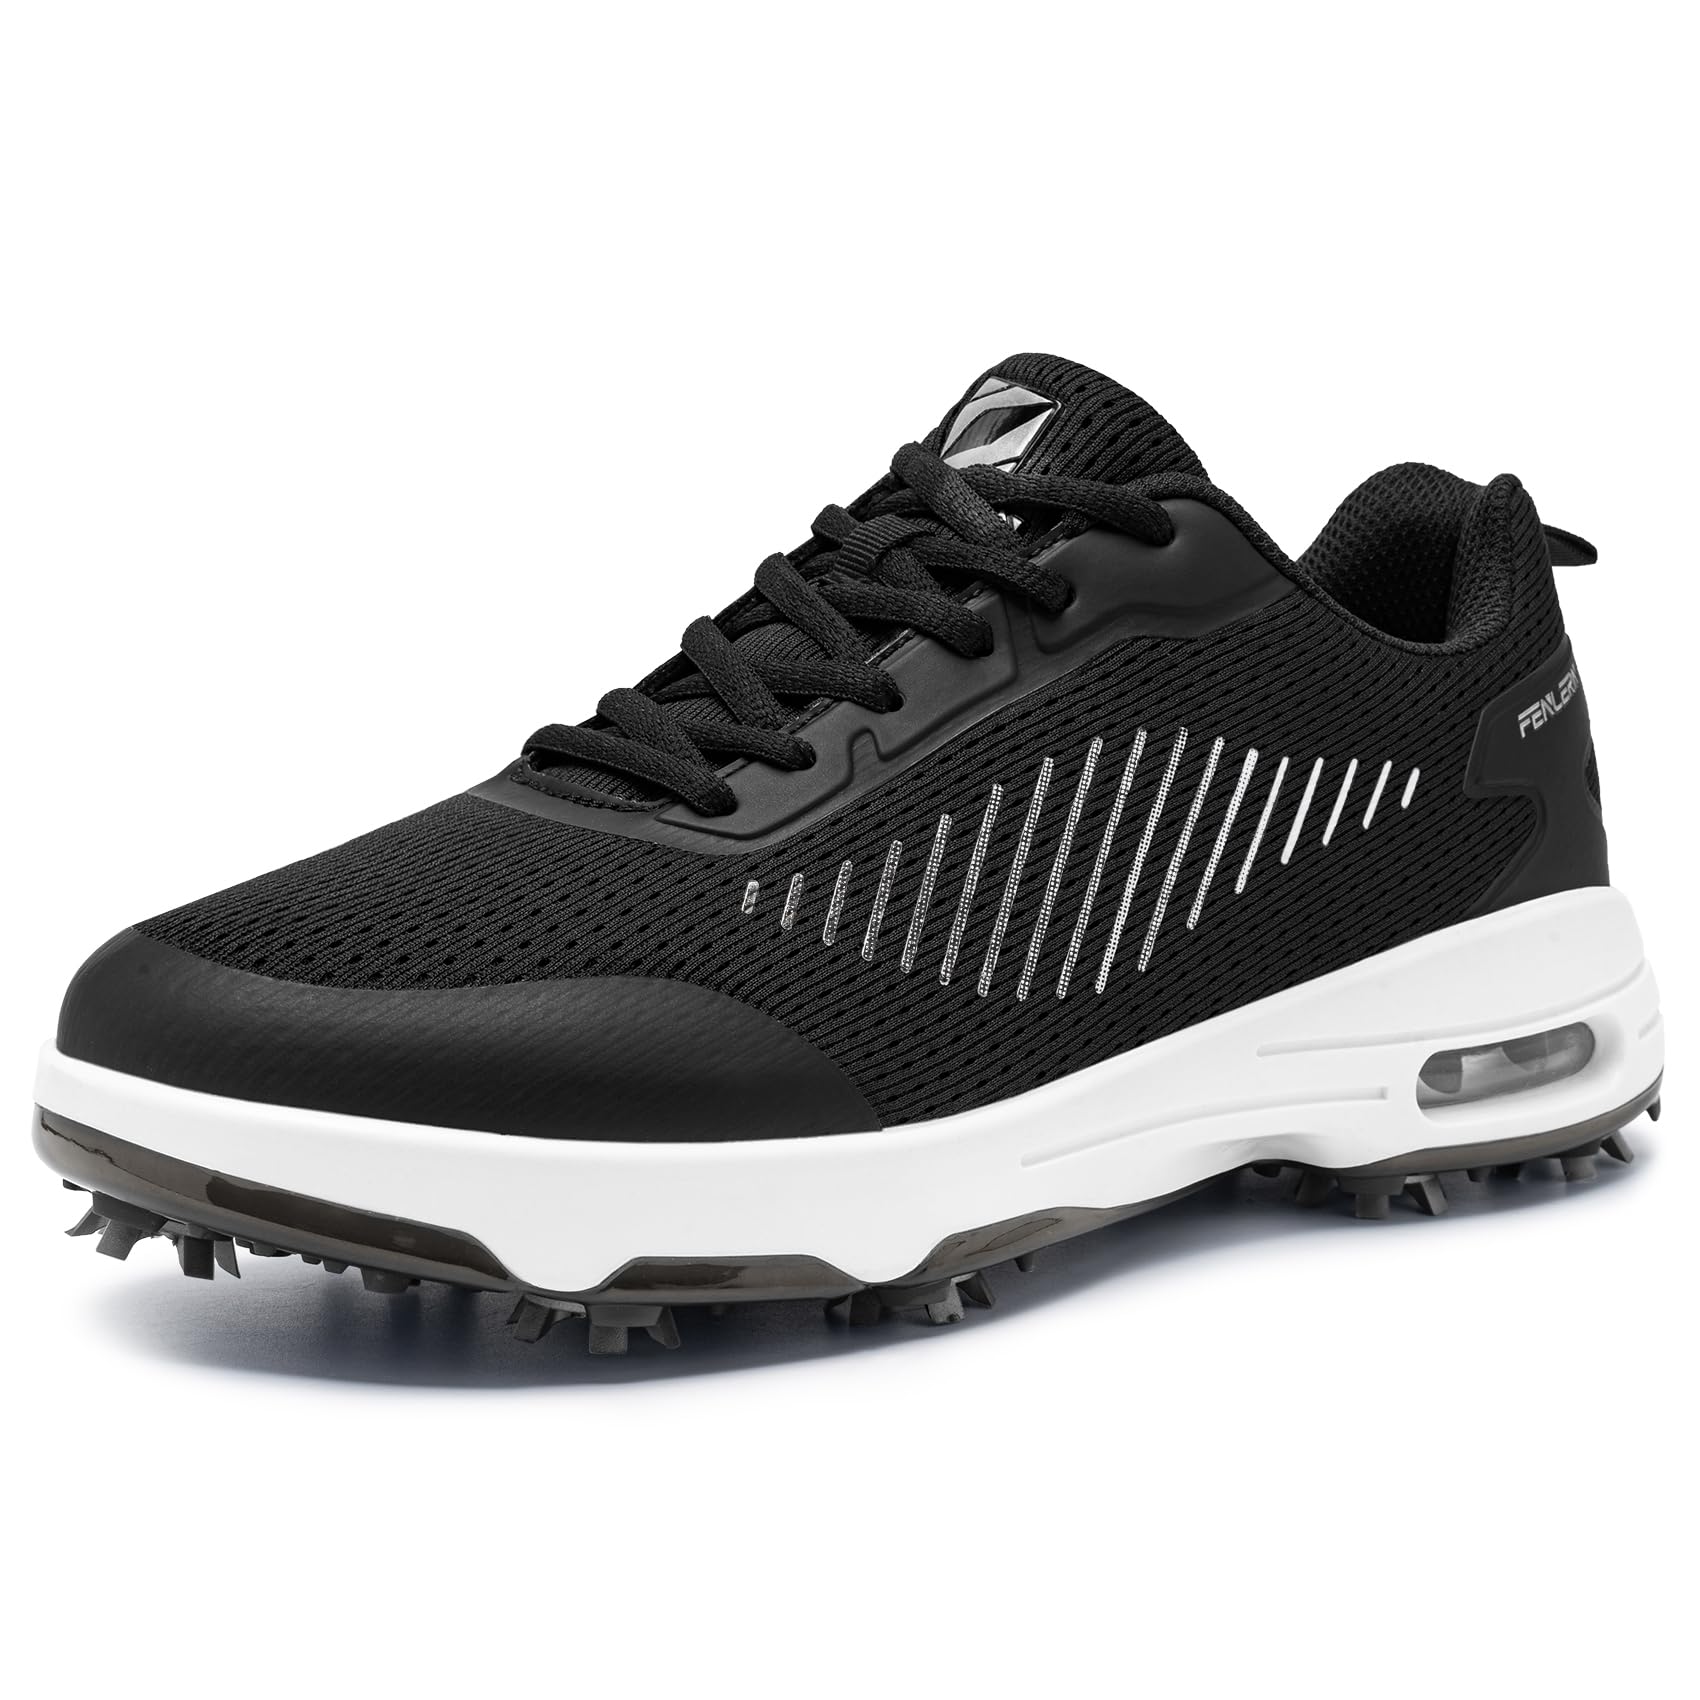 FENLERN Mens Golf Shoes Spiked Air Cushion Breathable Upper 12 Black White